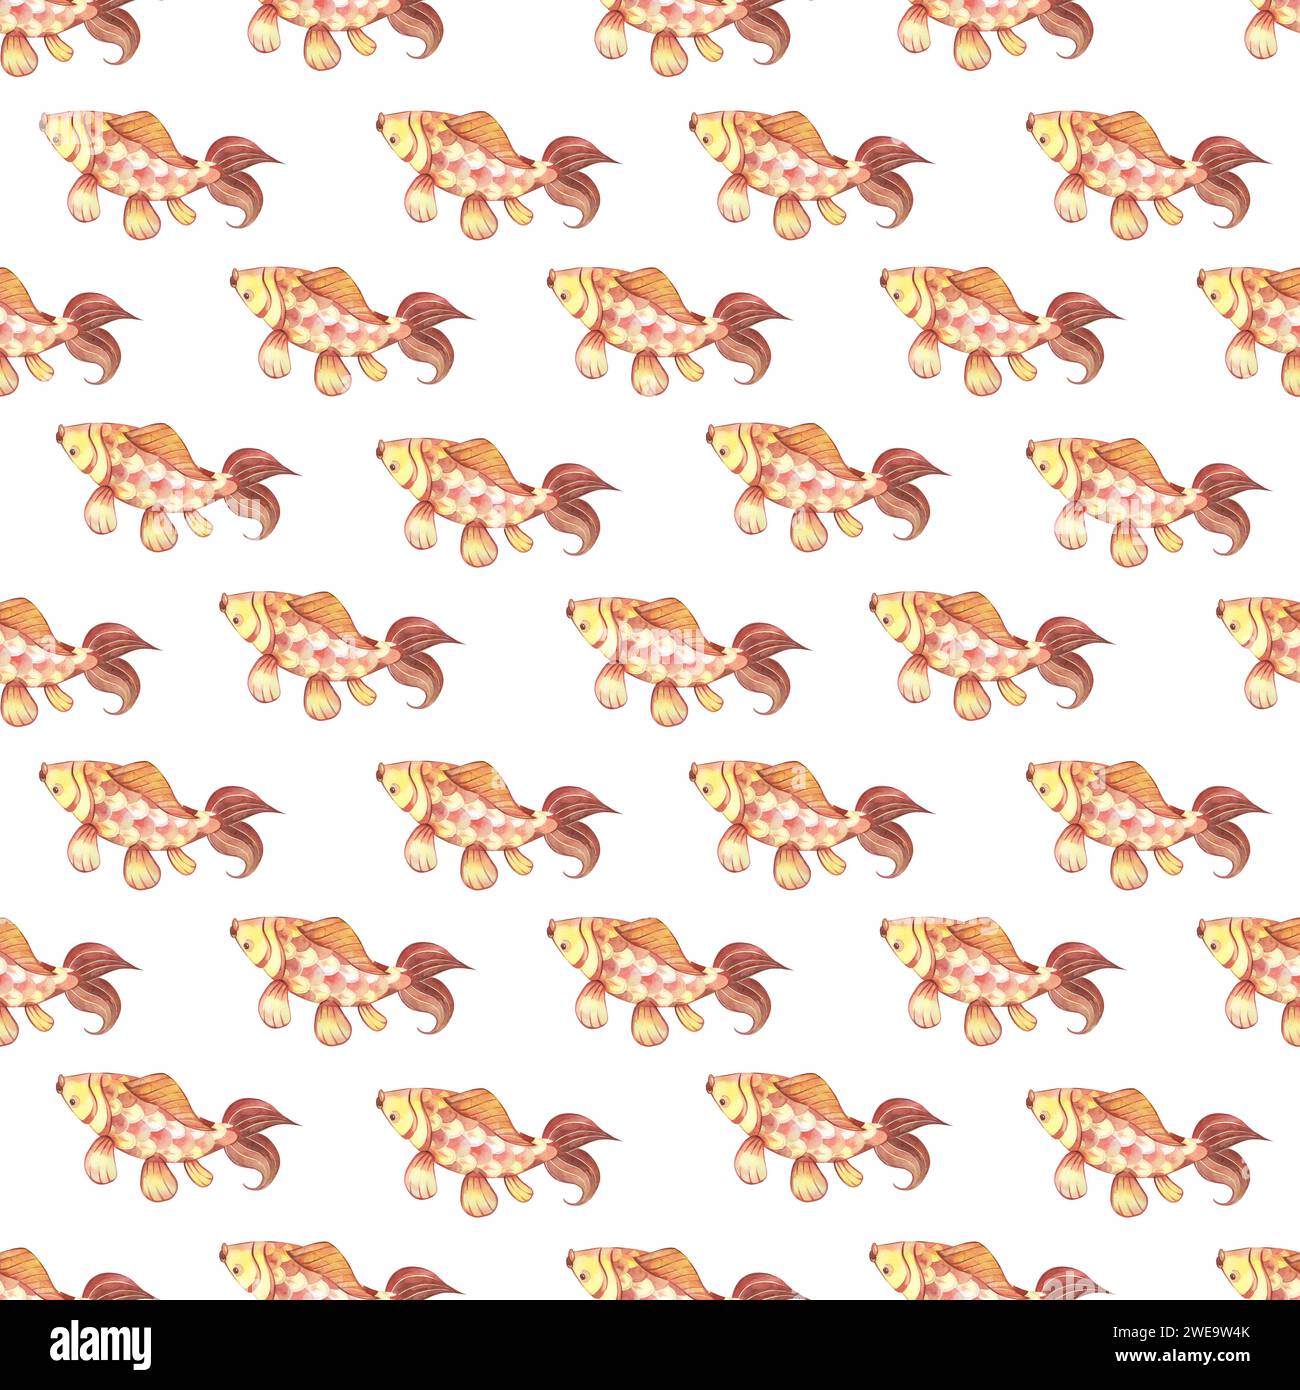 Seamless pattern. Chinese carp are red and yellow in color with large fins on a white background. All elements are hand-painted with watercolors. Stock Photo